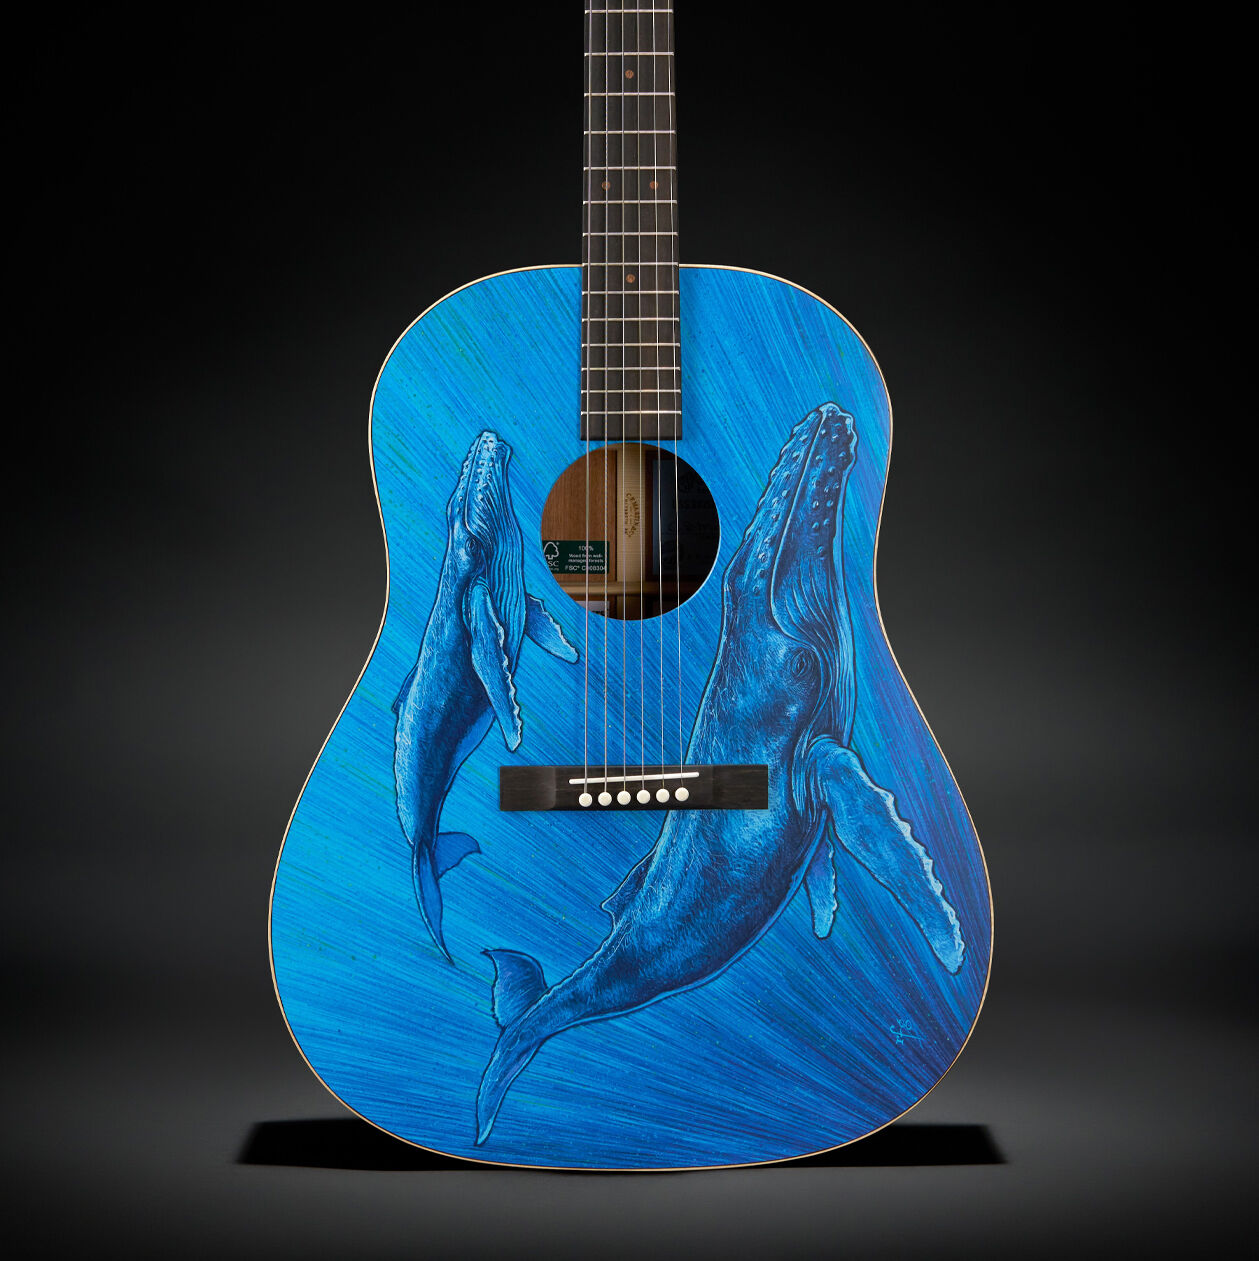 A photo of the DSS Biosphere guitar, a blue acoustic guitar with whales on it